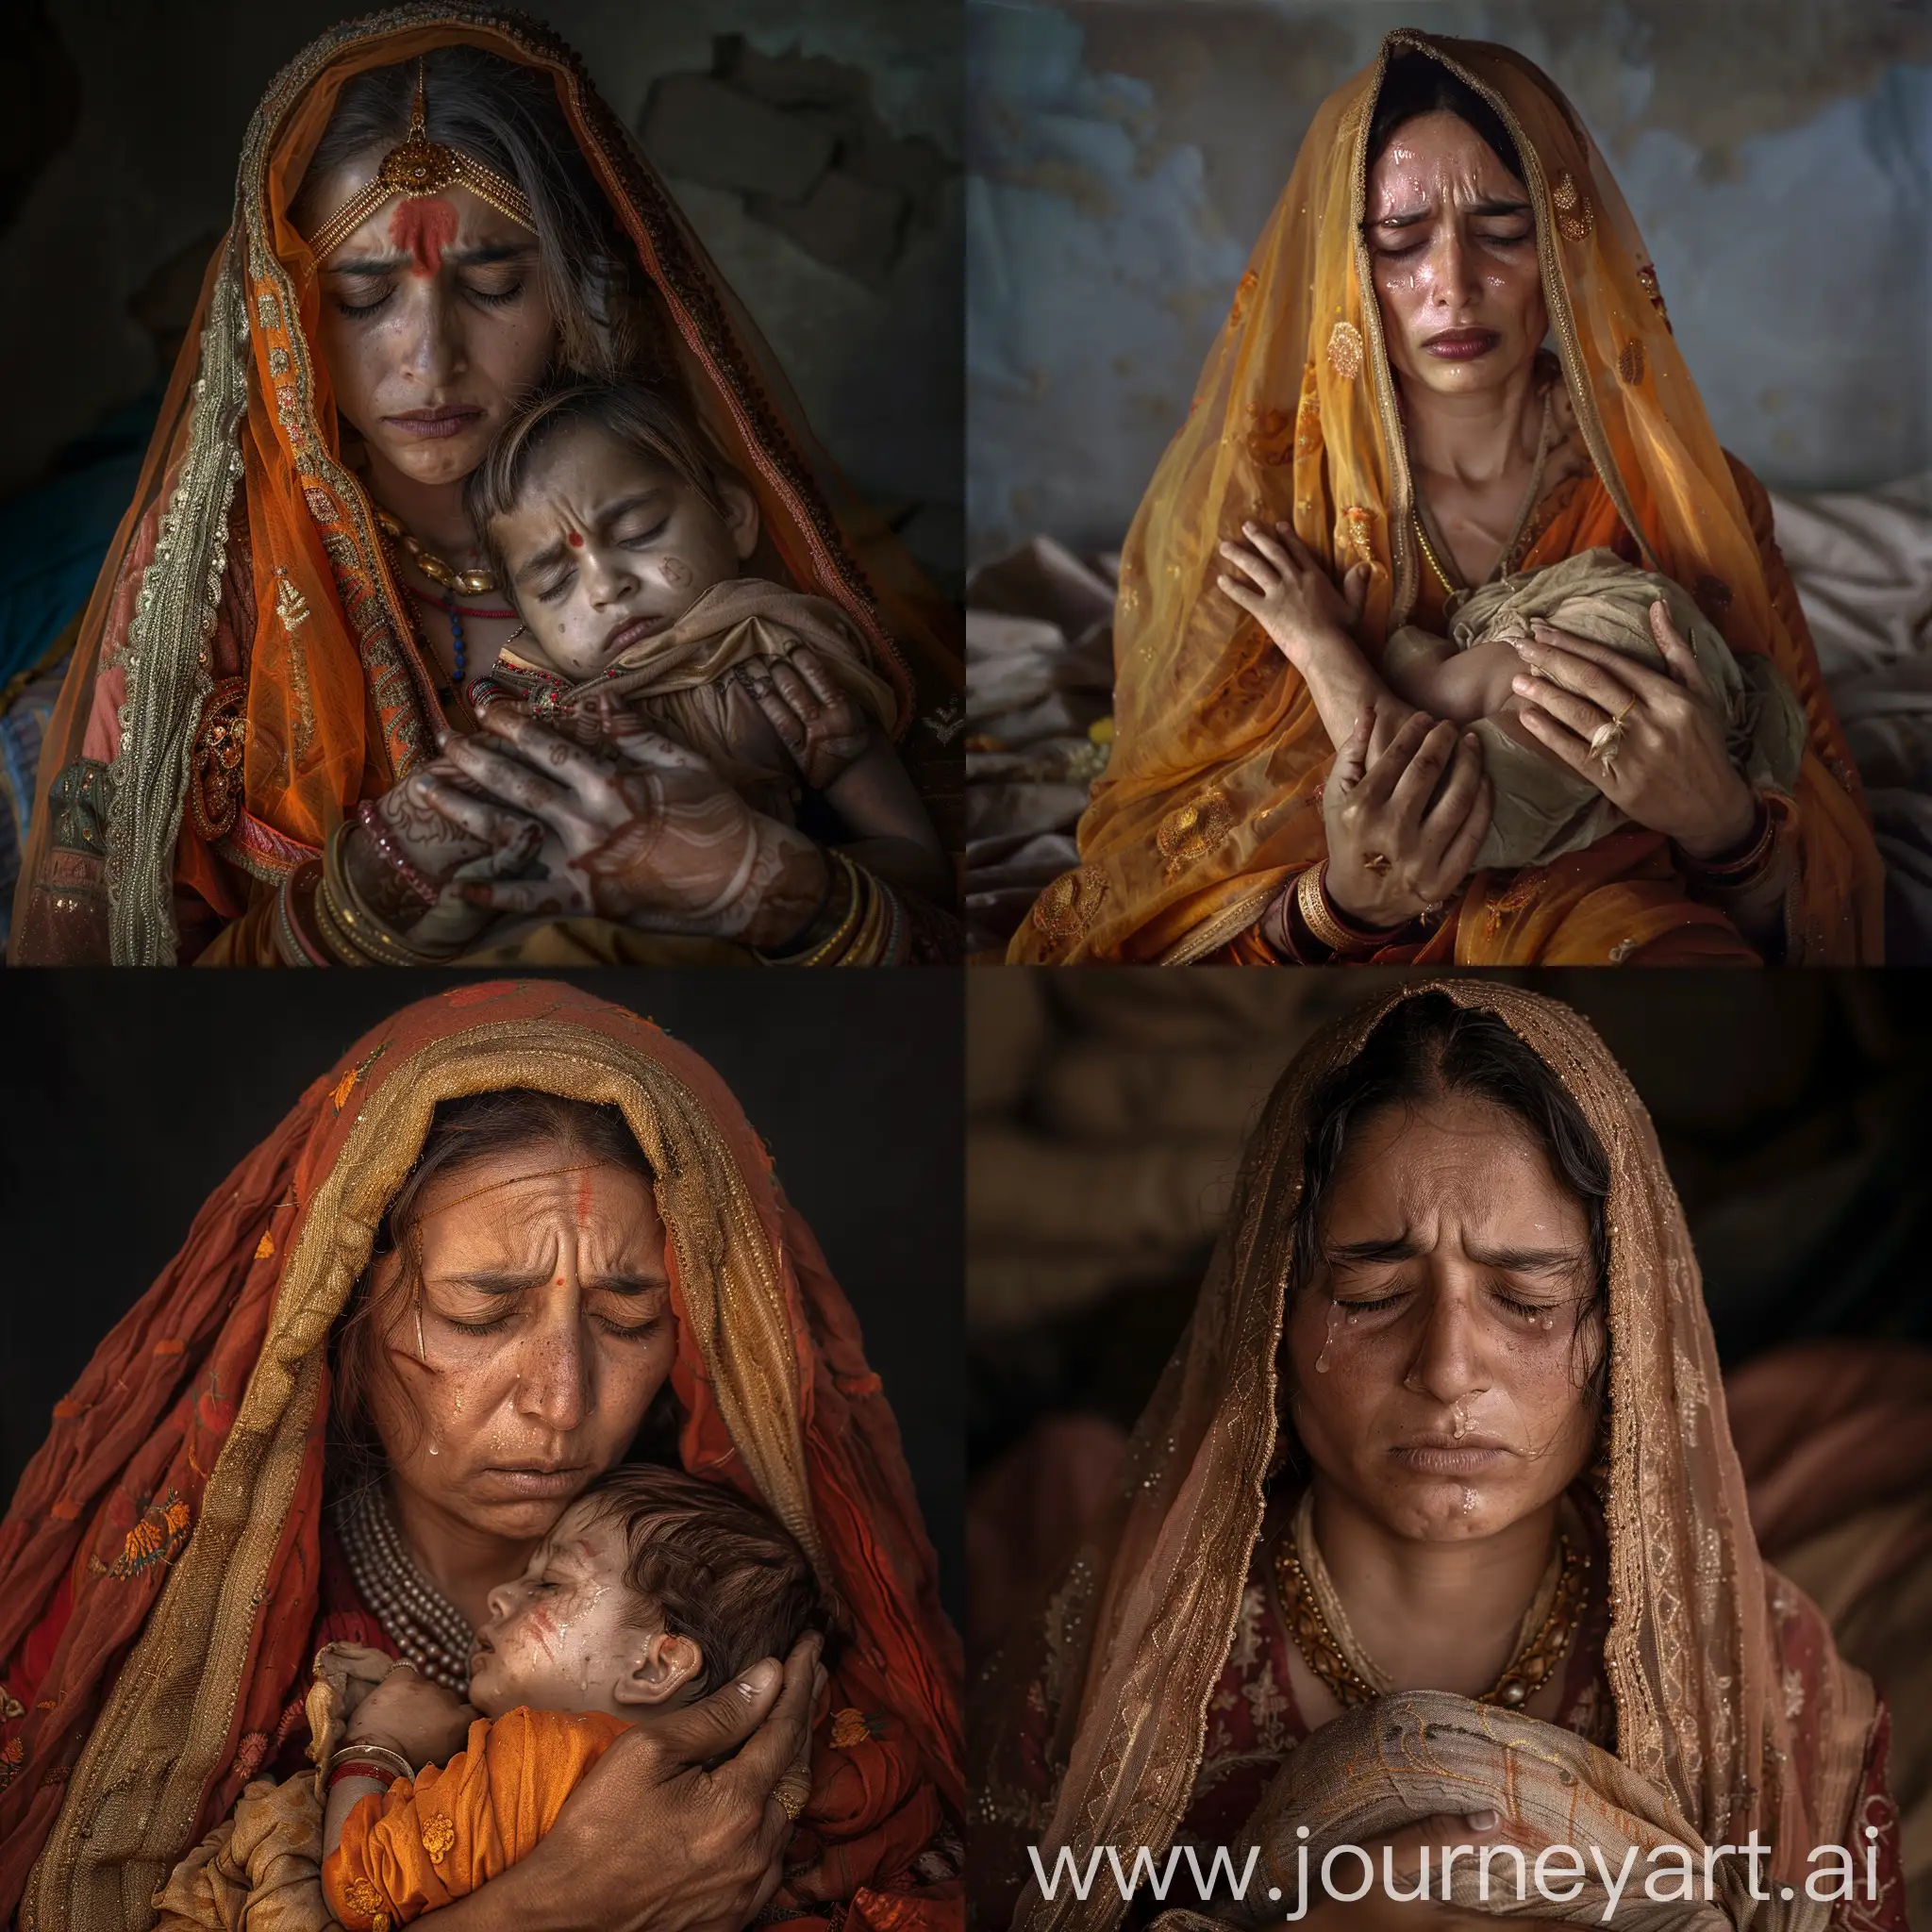 Grieving-Rajasthani-Rajput-Woman-Holding-Deceased-Child